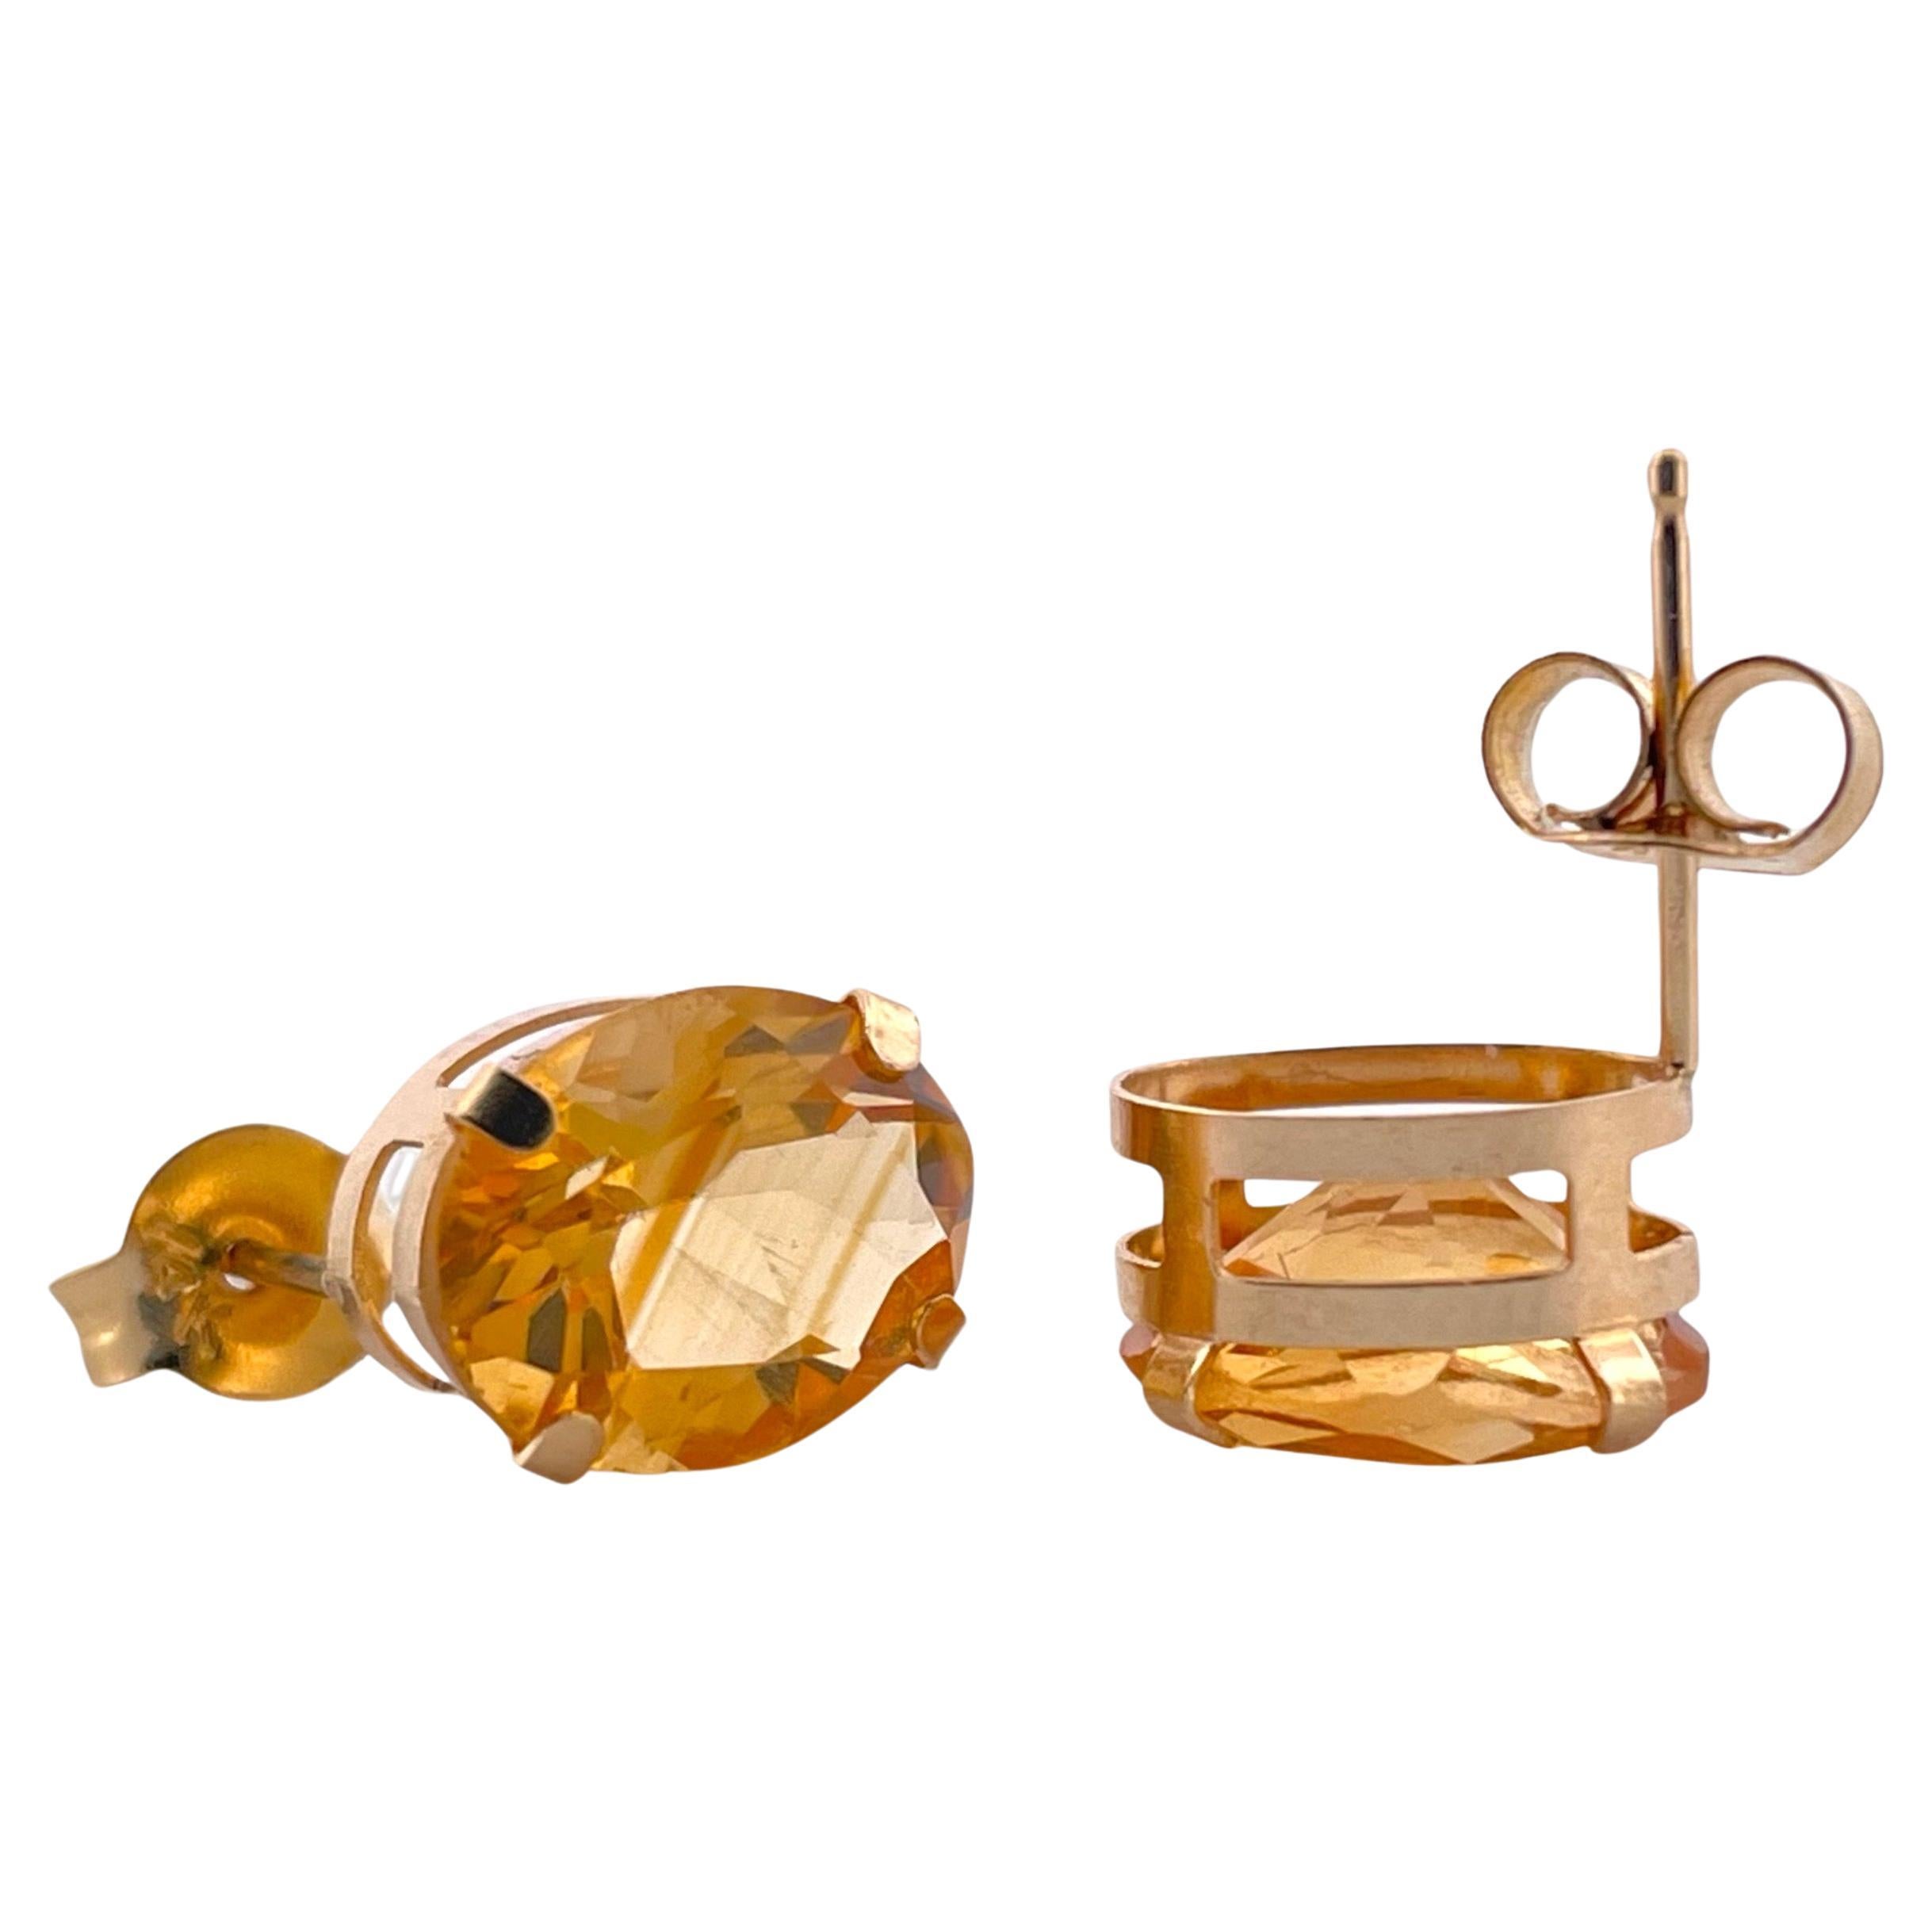 Bask in the warm, golden radiance of our Golden Glow Oval Citrine Stud Earrings, elegantly crafted from 14K yellow gold. Each stud weighs 1.33 grams and showcases a lustrous oval citrine, a gemstone symbolic of sunlight and joy. The rich yellow gold